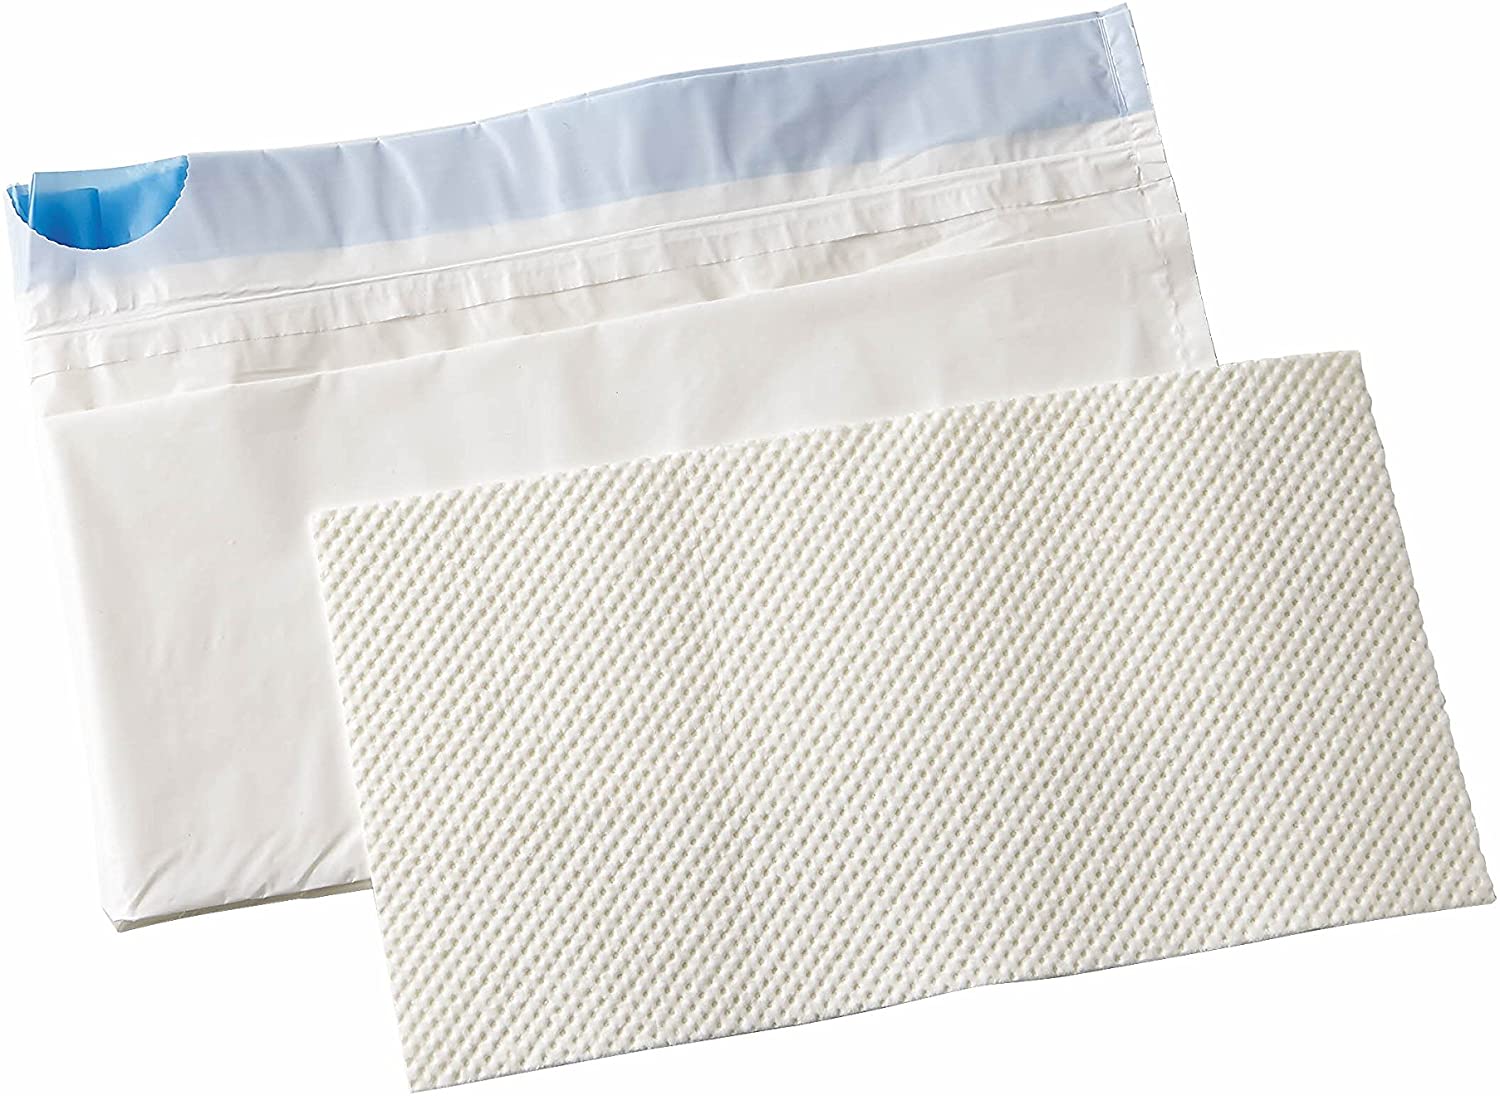 12-Count Medline Commode Liner w/ Absorbent Pad $4.55 + Free Shipping w/ Prime